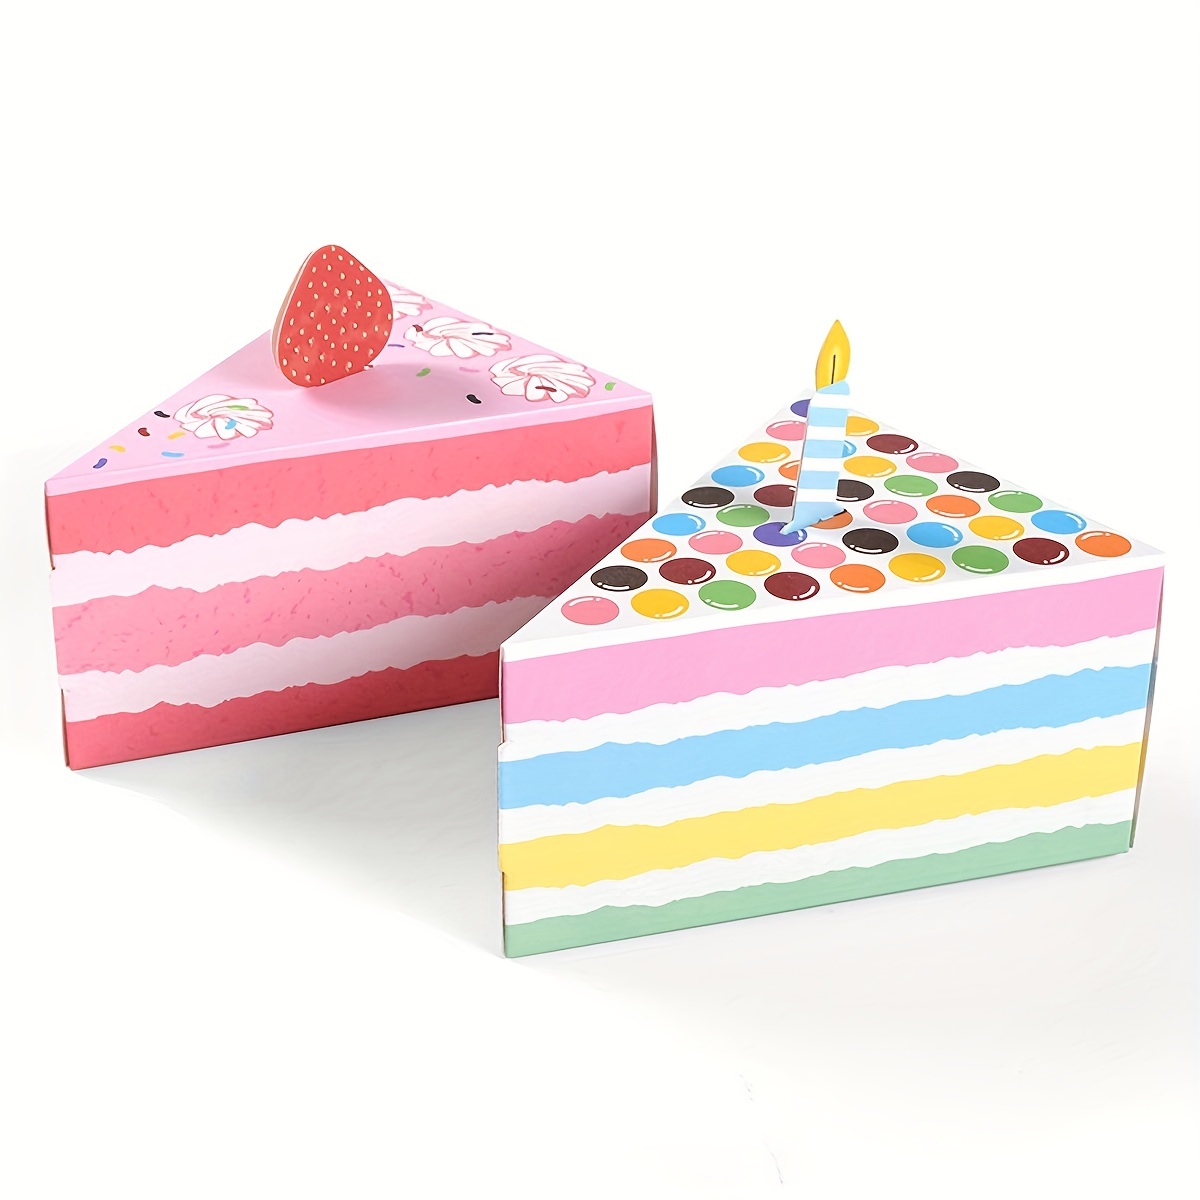 Candy Shop Rainbow Sweets Birthday Cake | Susie's Cakes